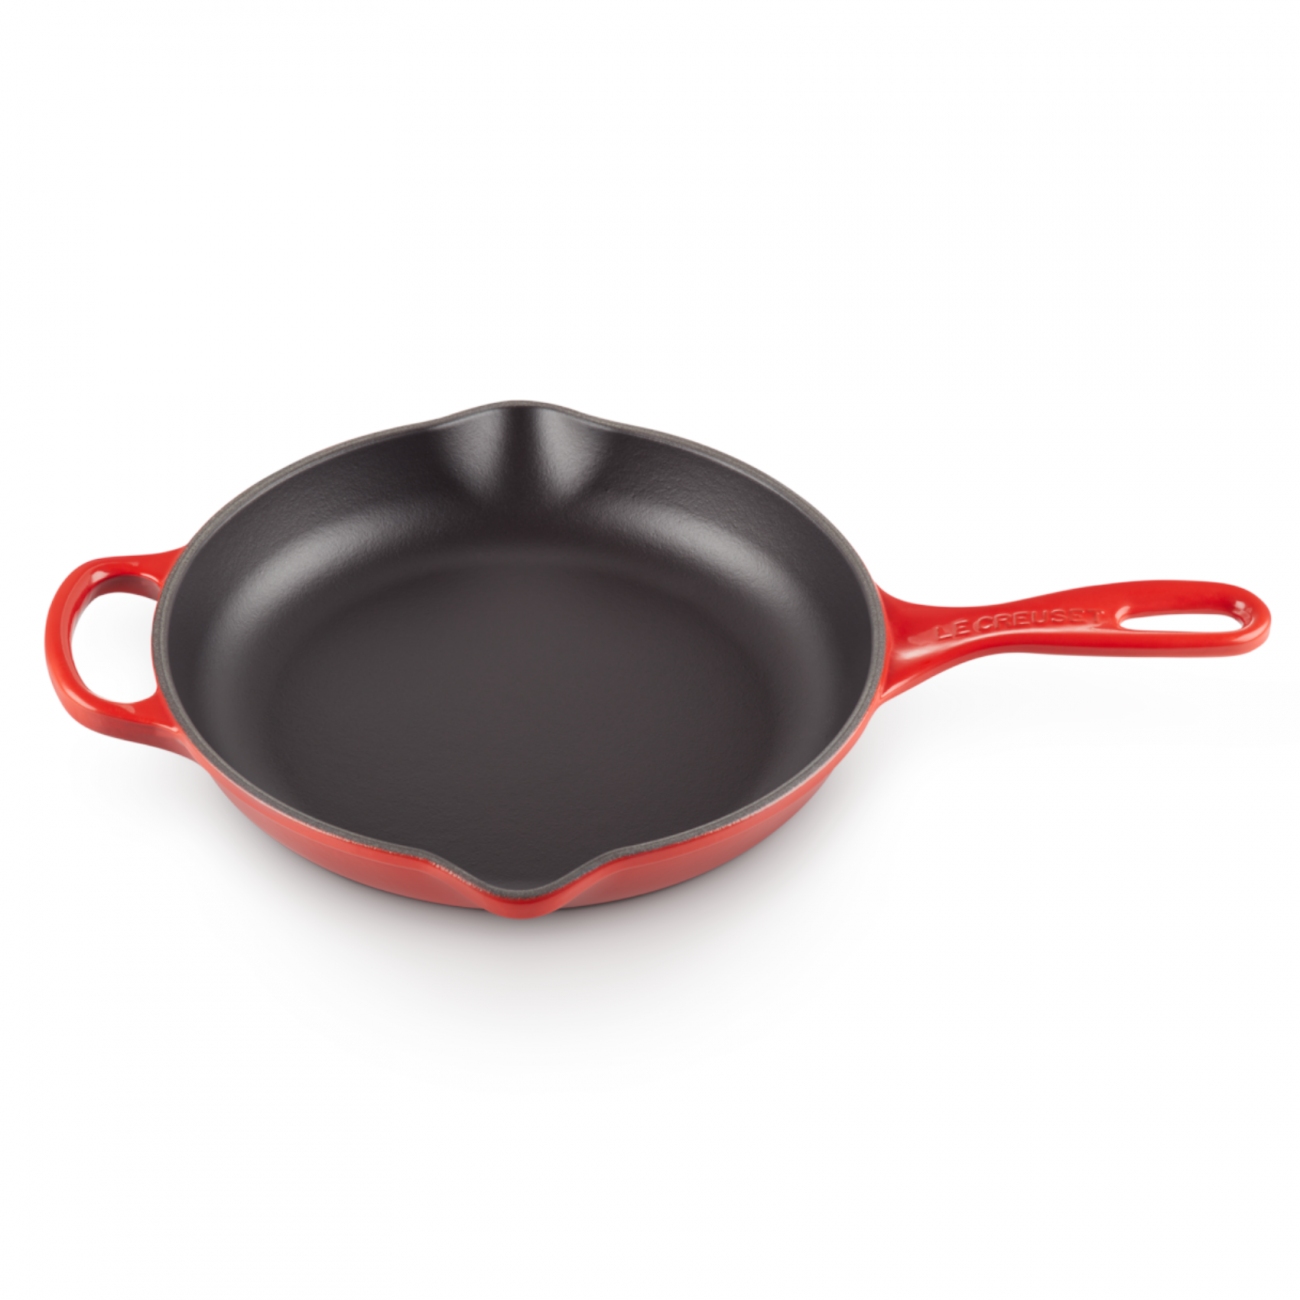 LE CREUSET 16 French Vintage Enameled Cast Iron Frying Pan, Made